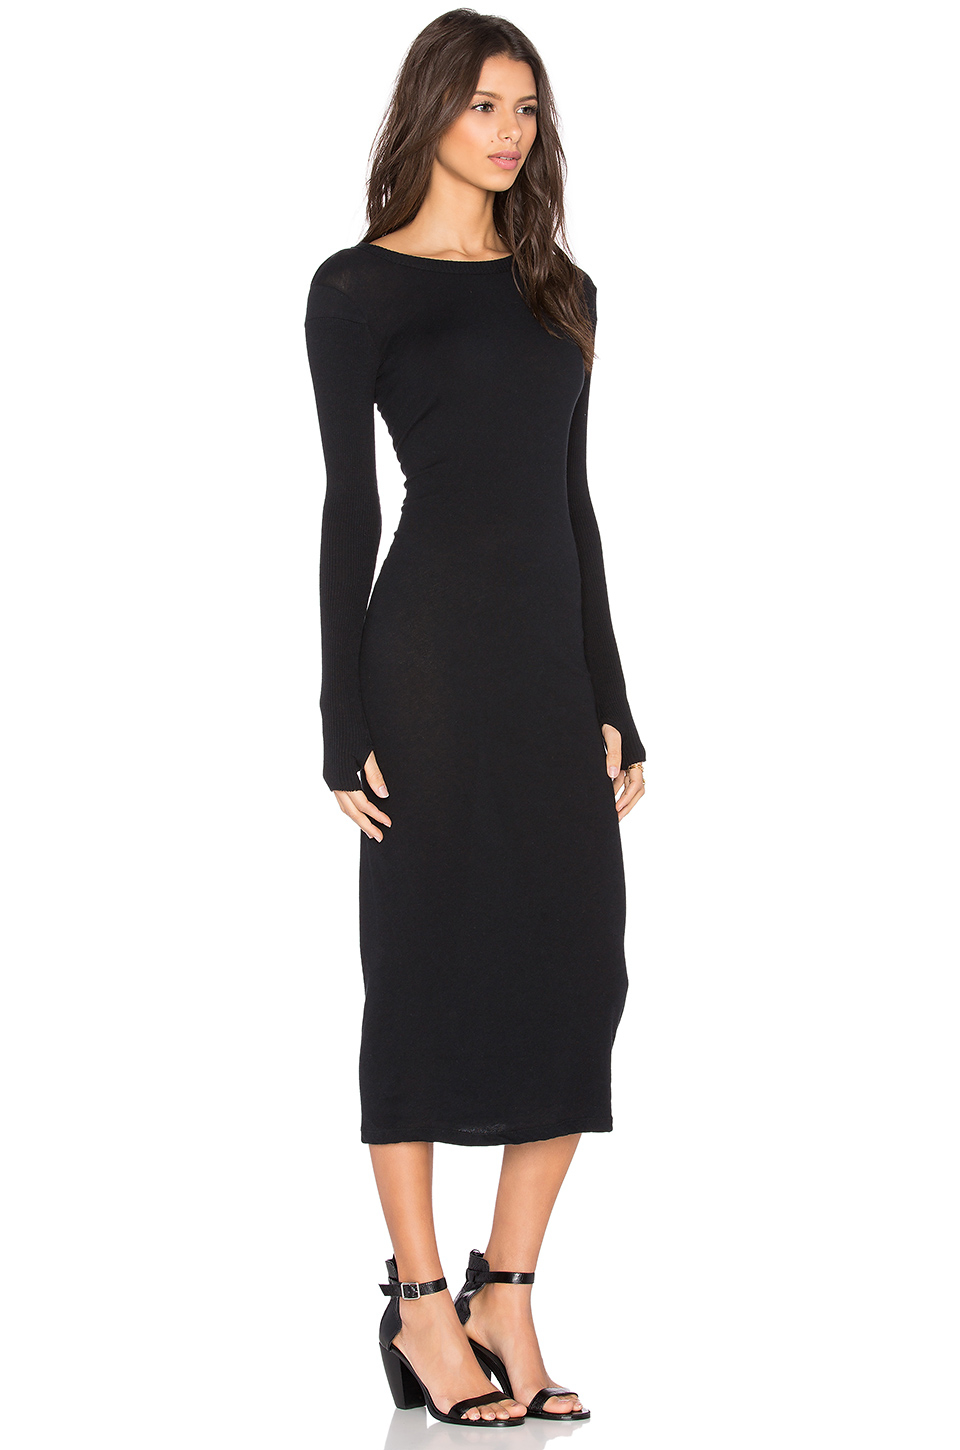 Enza costa Cashmere Long Sleeve Crew Neck Dress in Black | Lyst